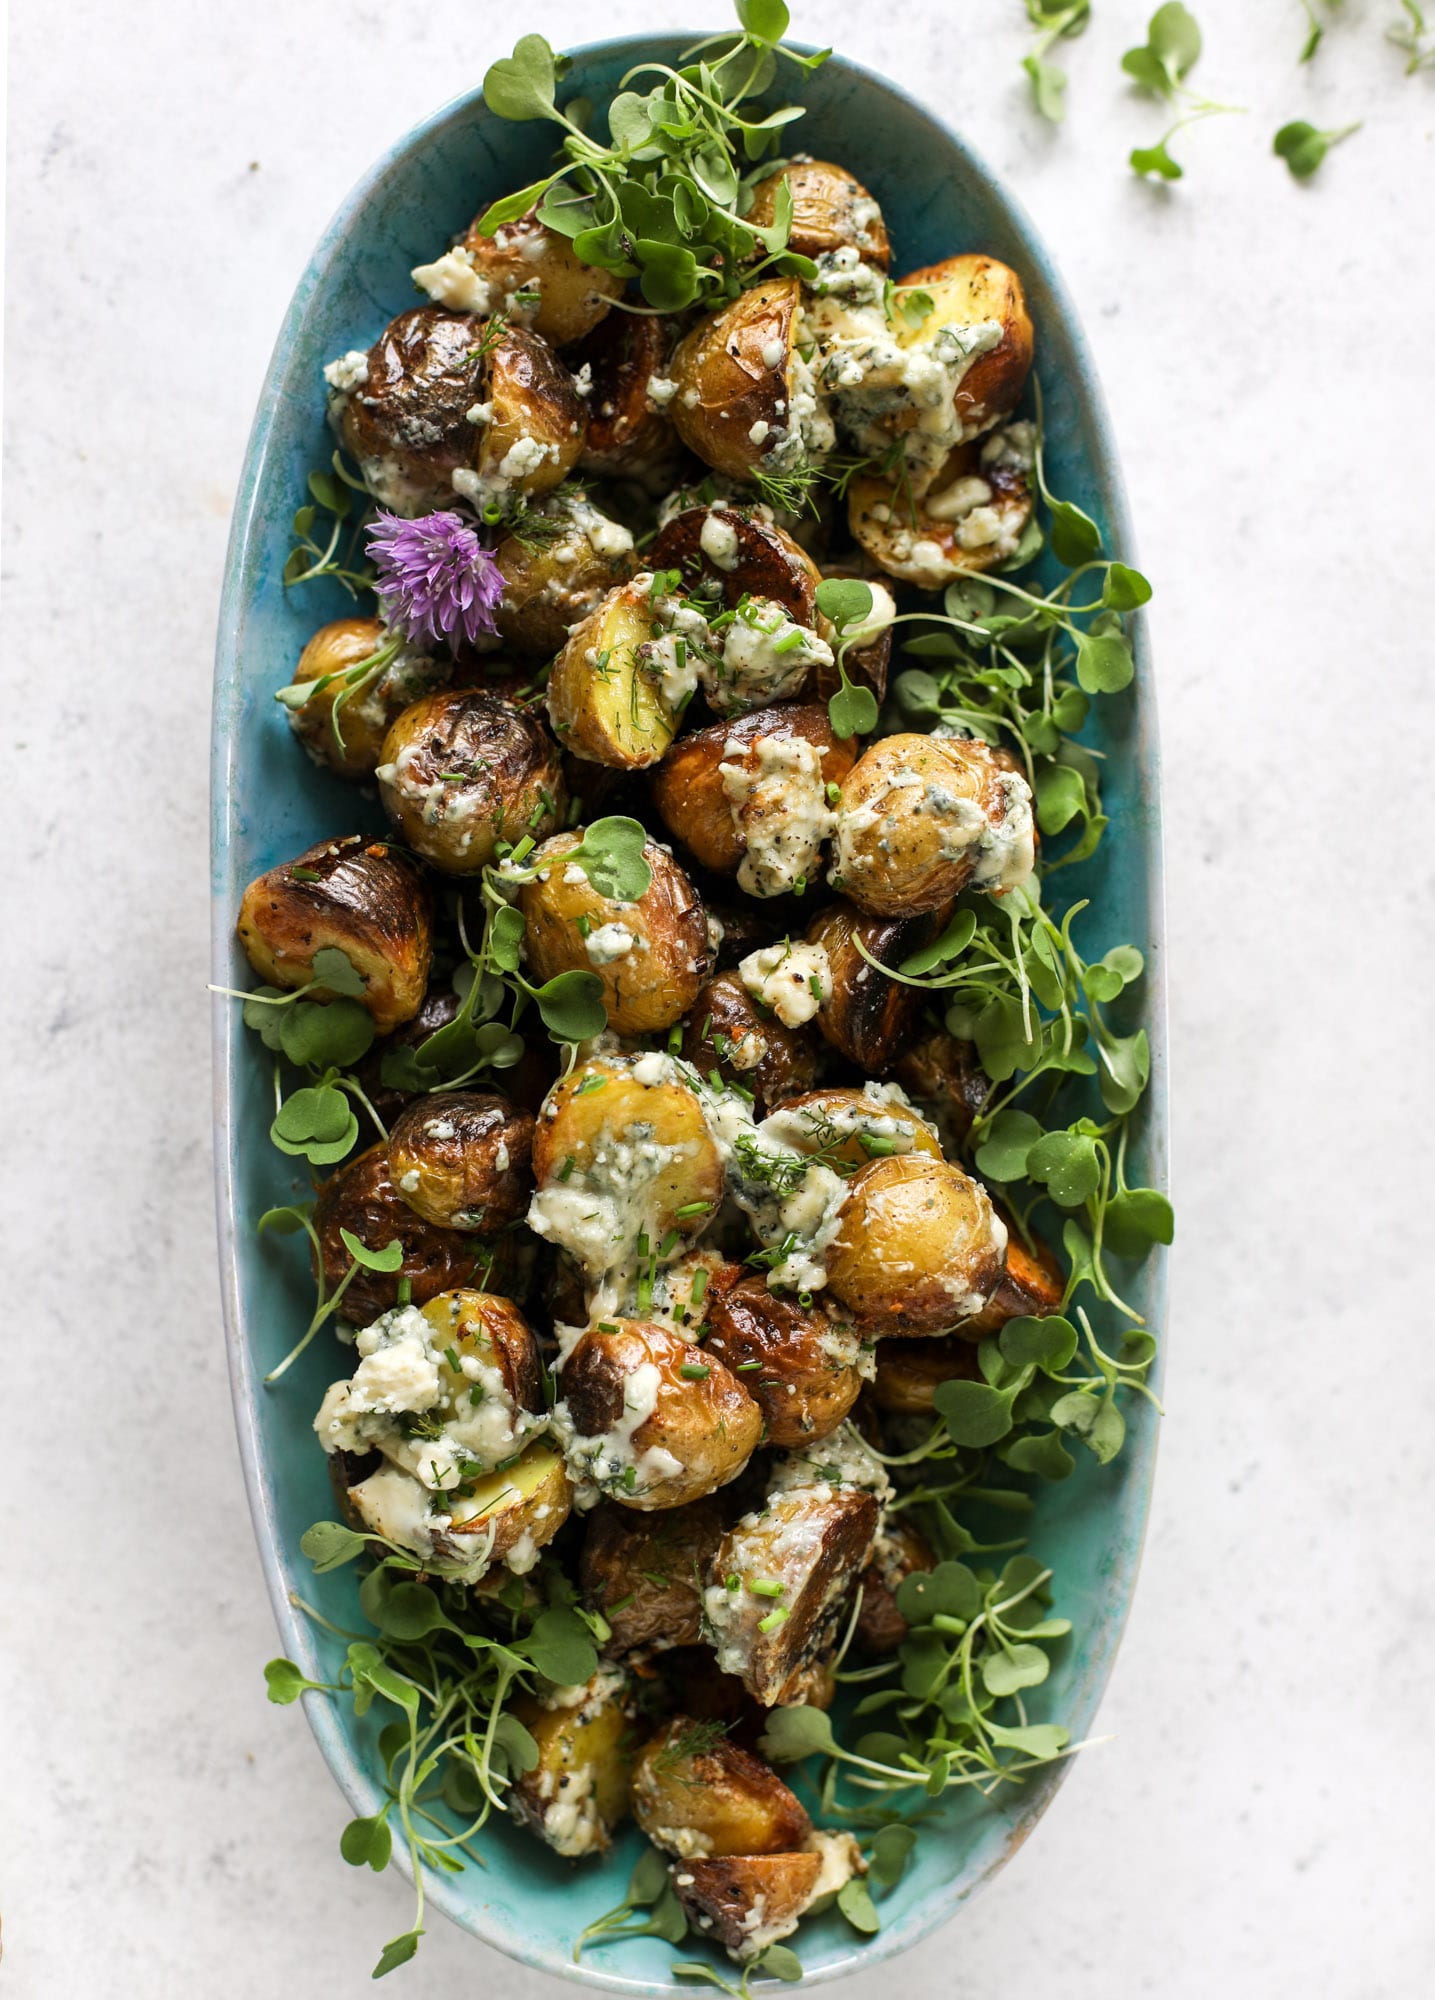 These grilled gorgonzola potatoes are loaded with flavor! Crispy, crunchy grilled bab golds topped with creamy blue cheese and fresh herbs.